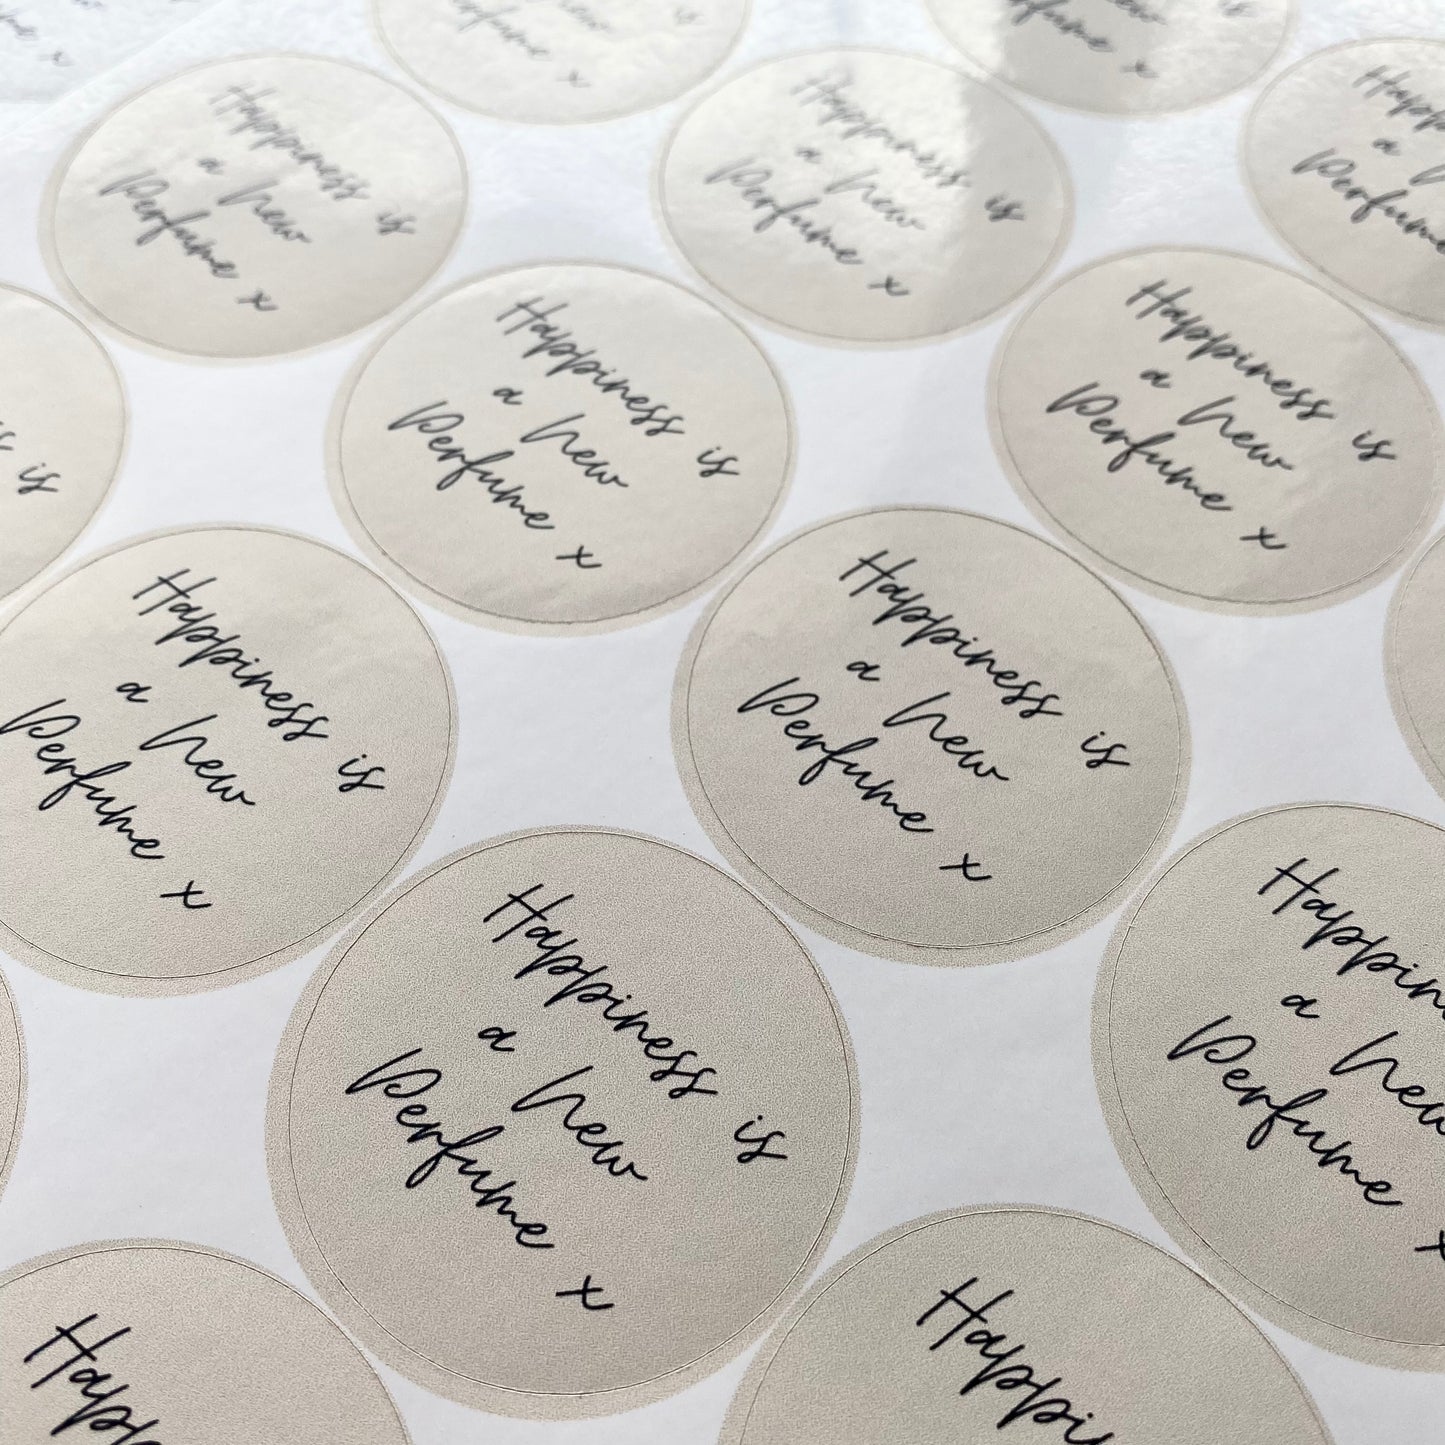 Happiness is a new perfume - 37mm stickers